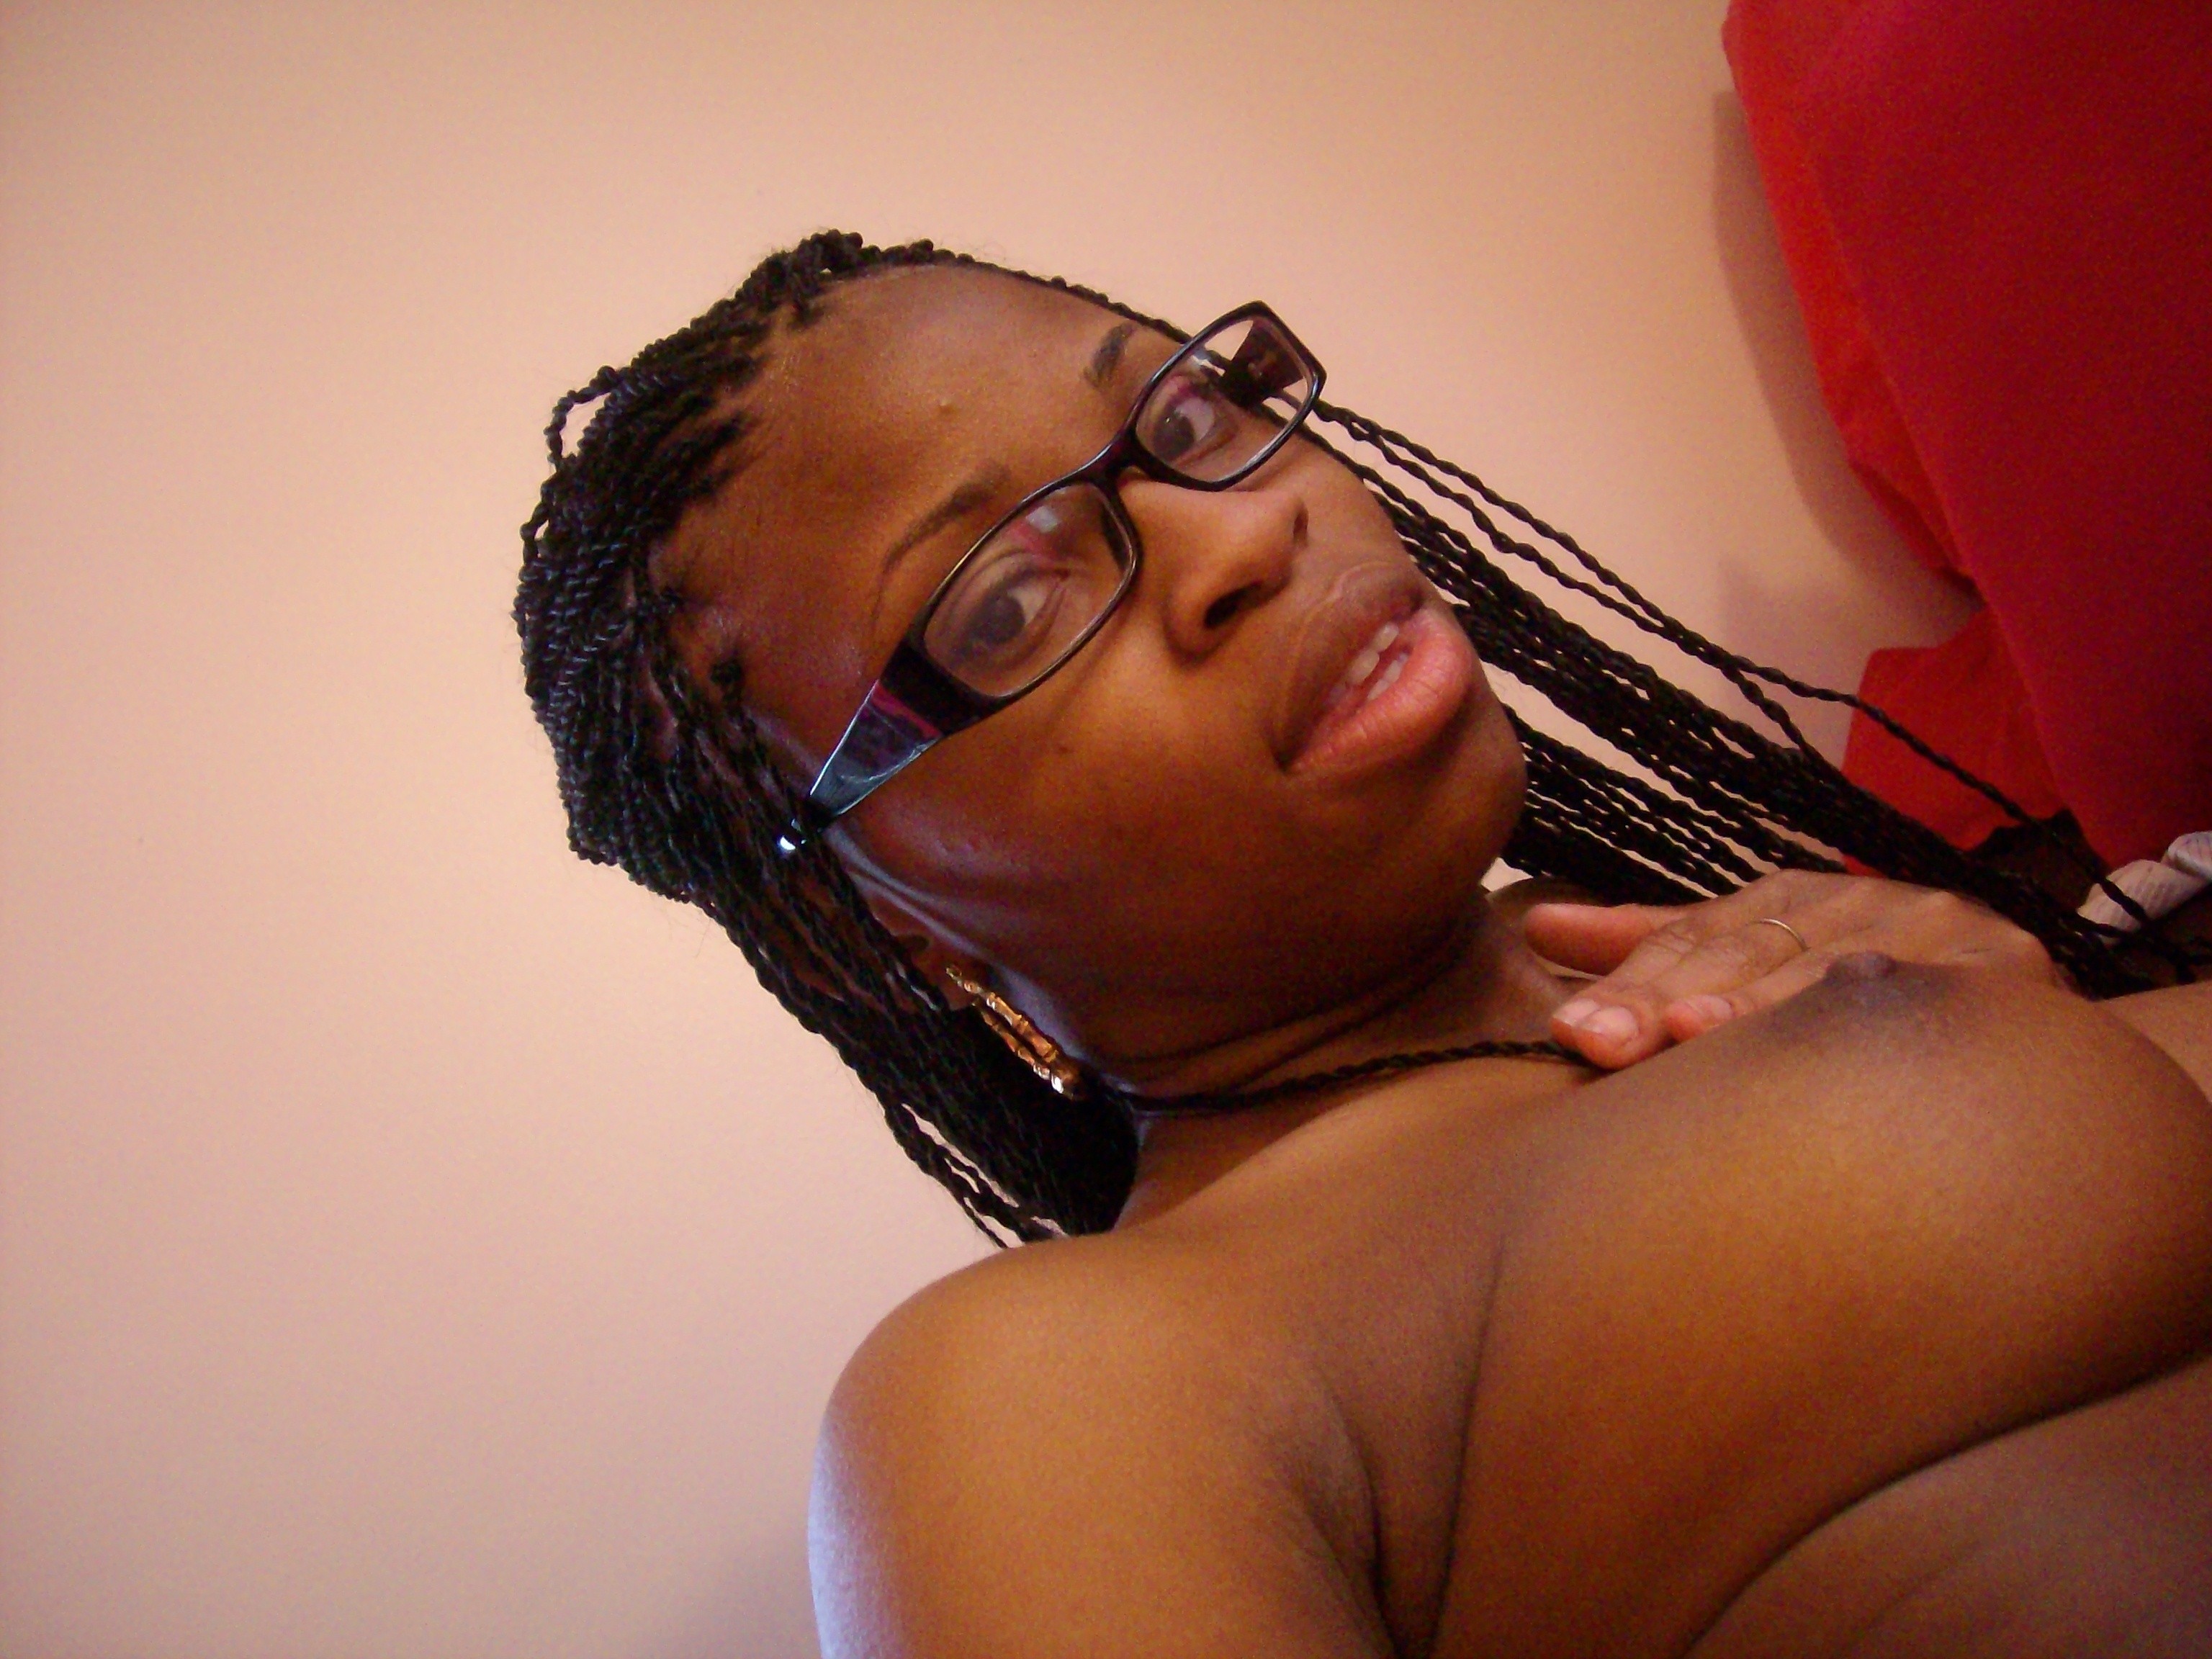 Hot ebony nudes with glasses